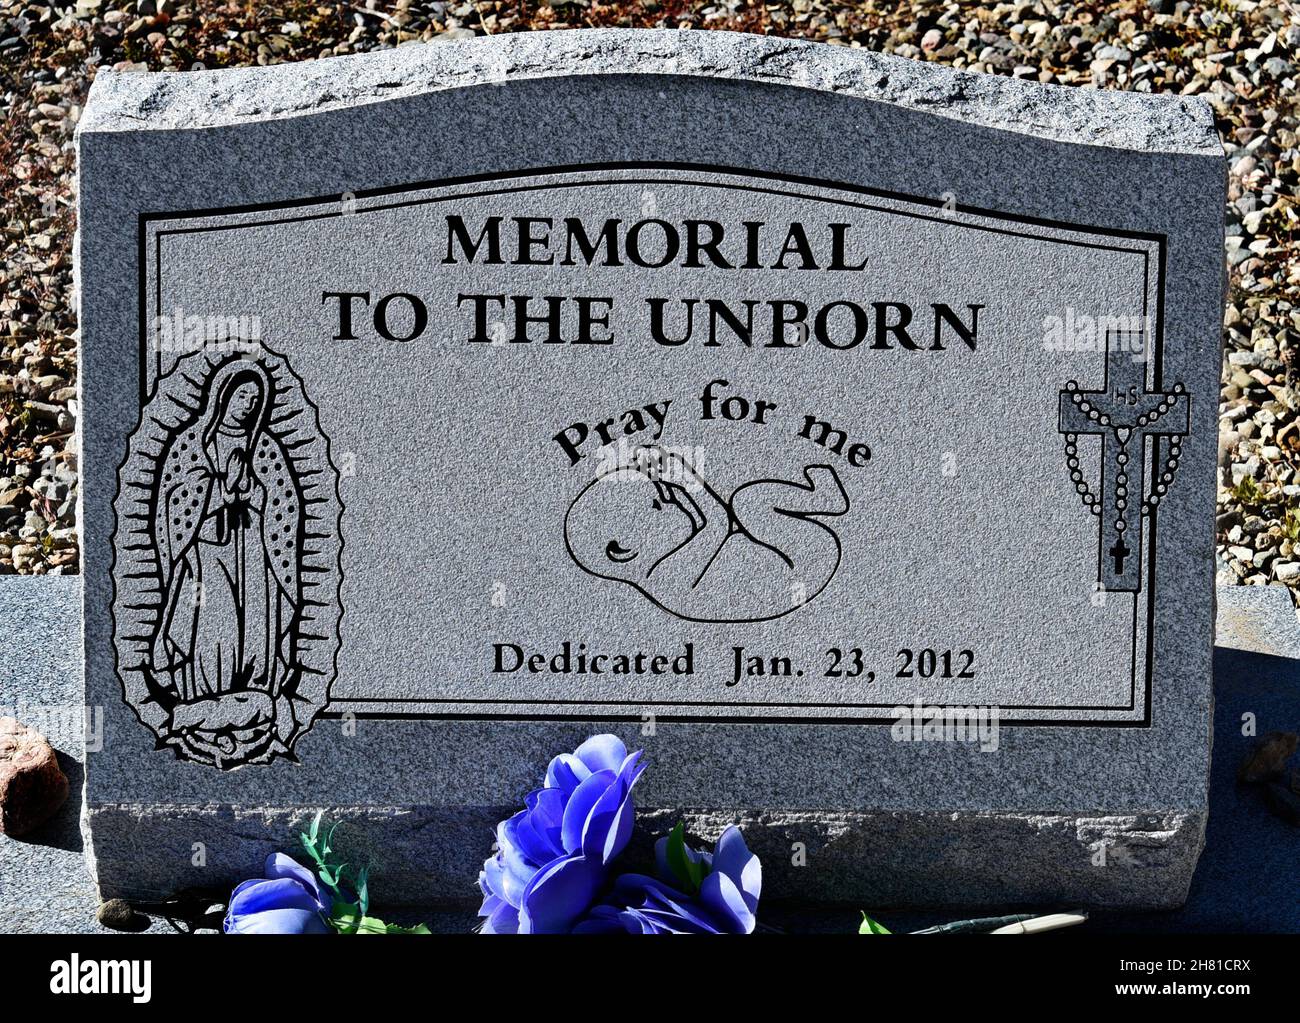 A memorial to aborted babies at the San Francisco de Asis Mission Church in Rancho de Taos, New Mexico. Stock Photo